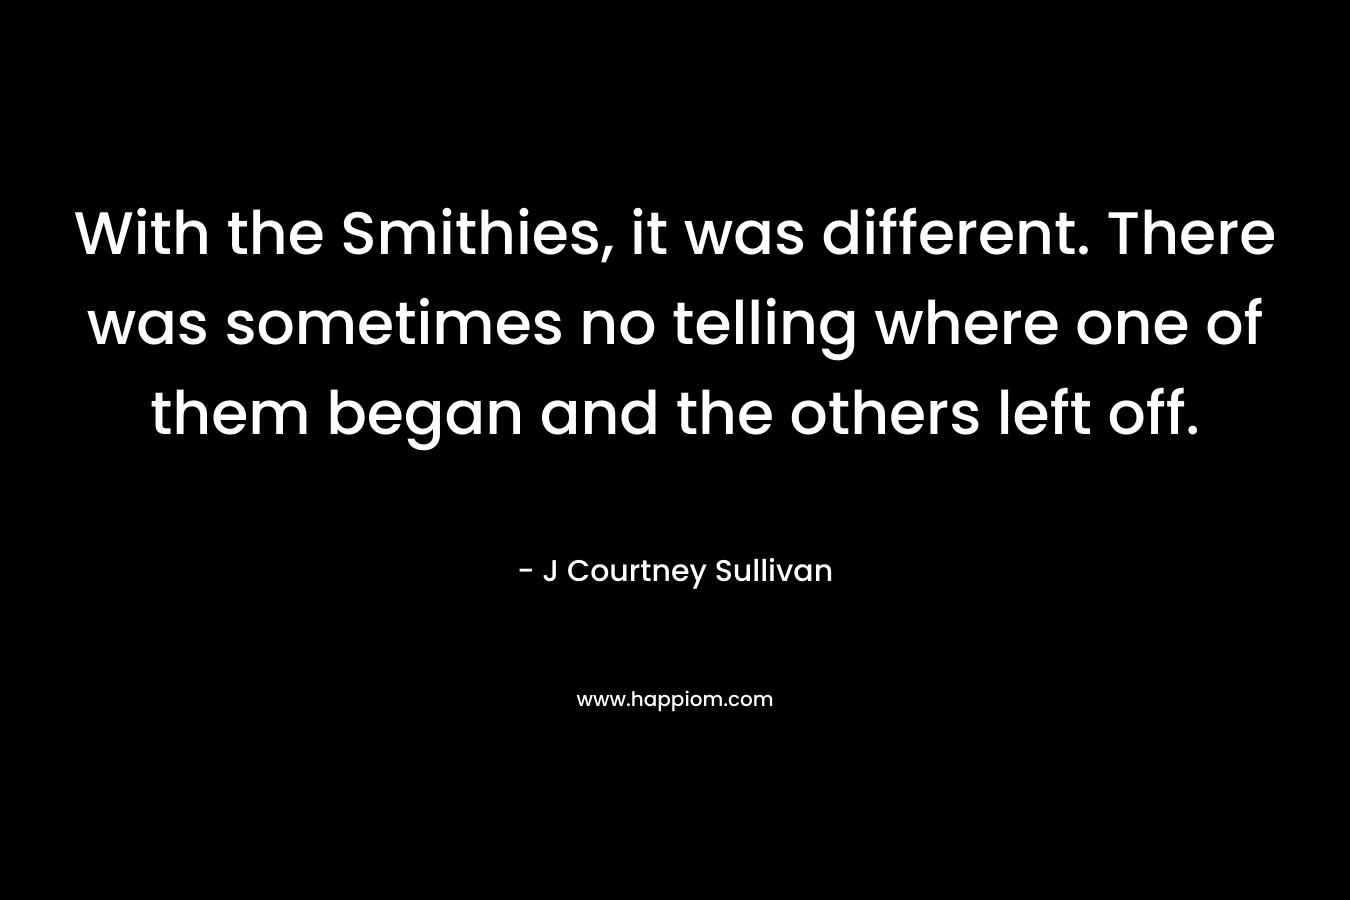 With the Smithies, it was different. There was sometimes no telling where one of them began and the others left off.